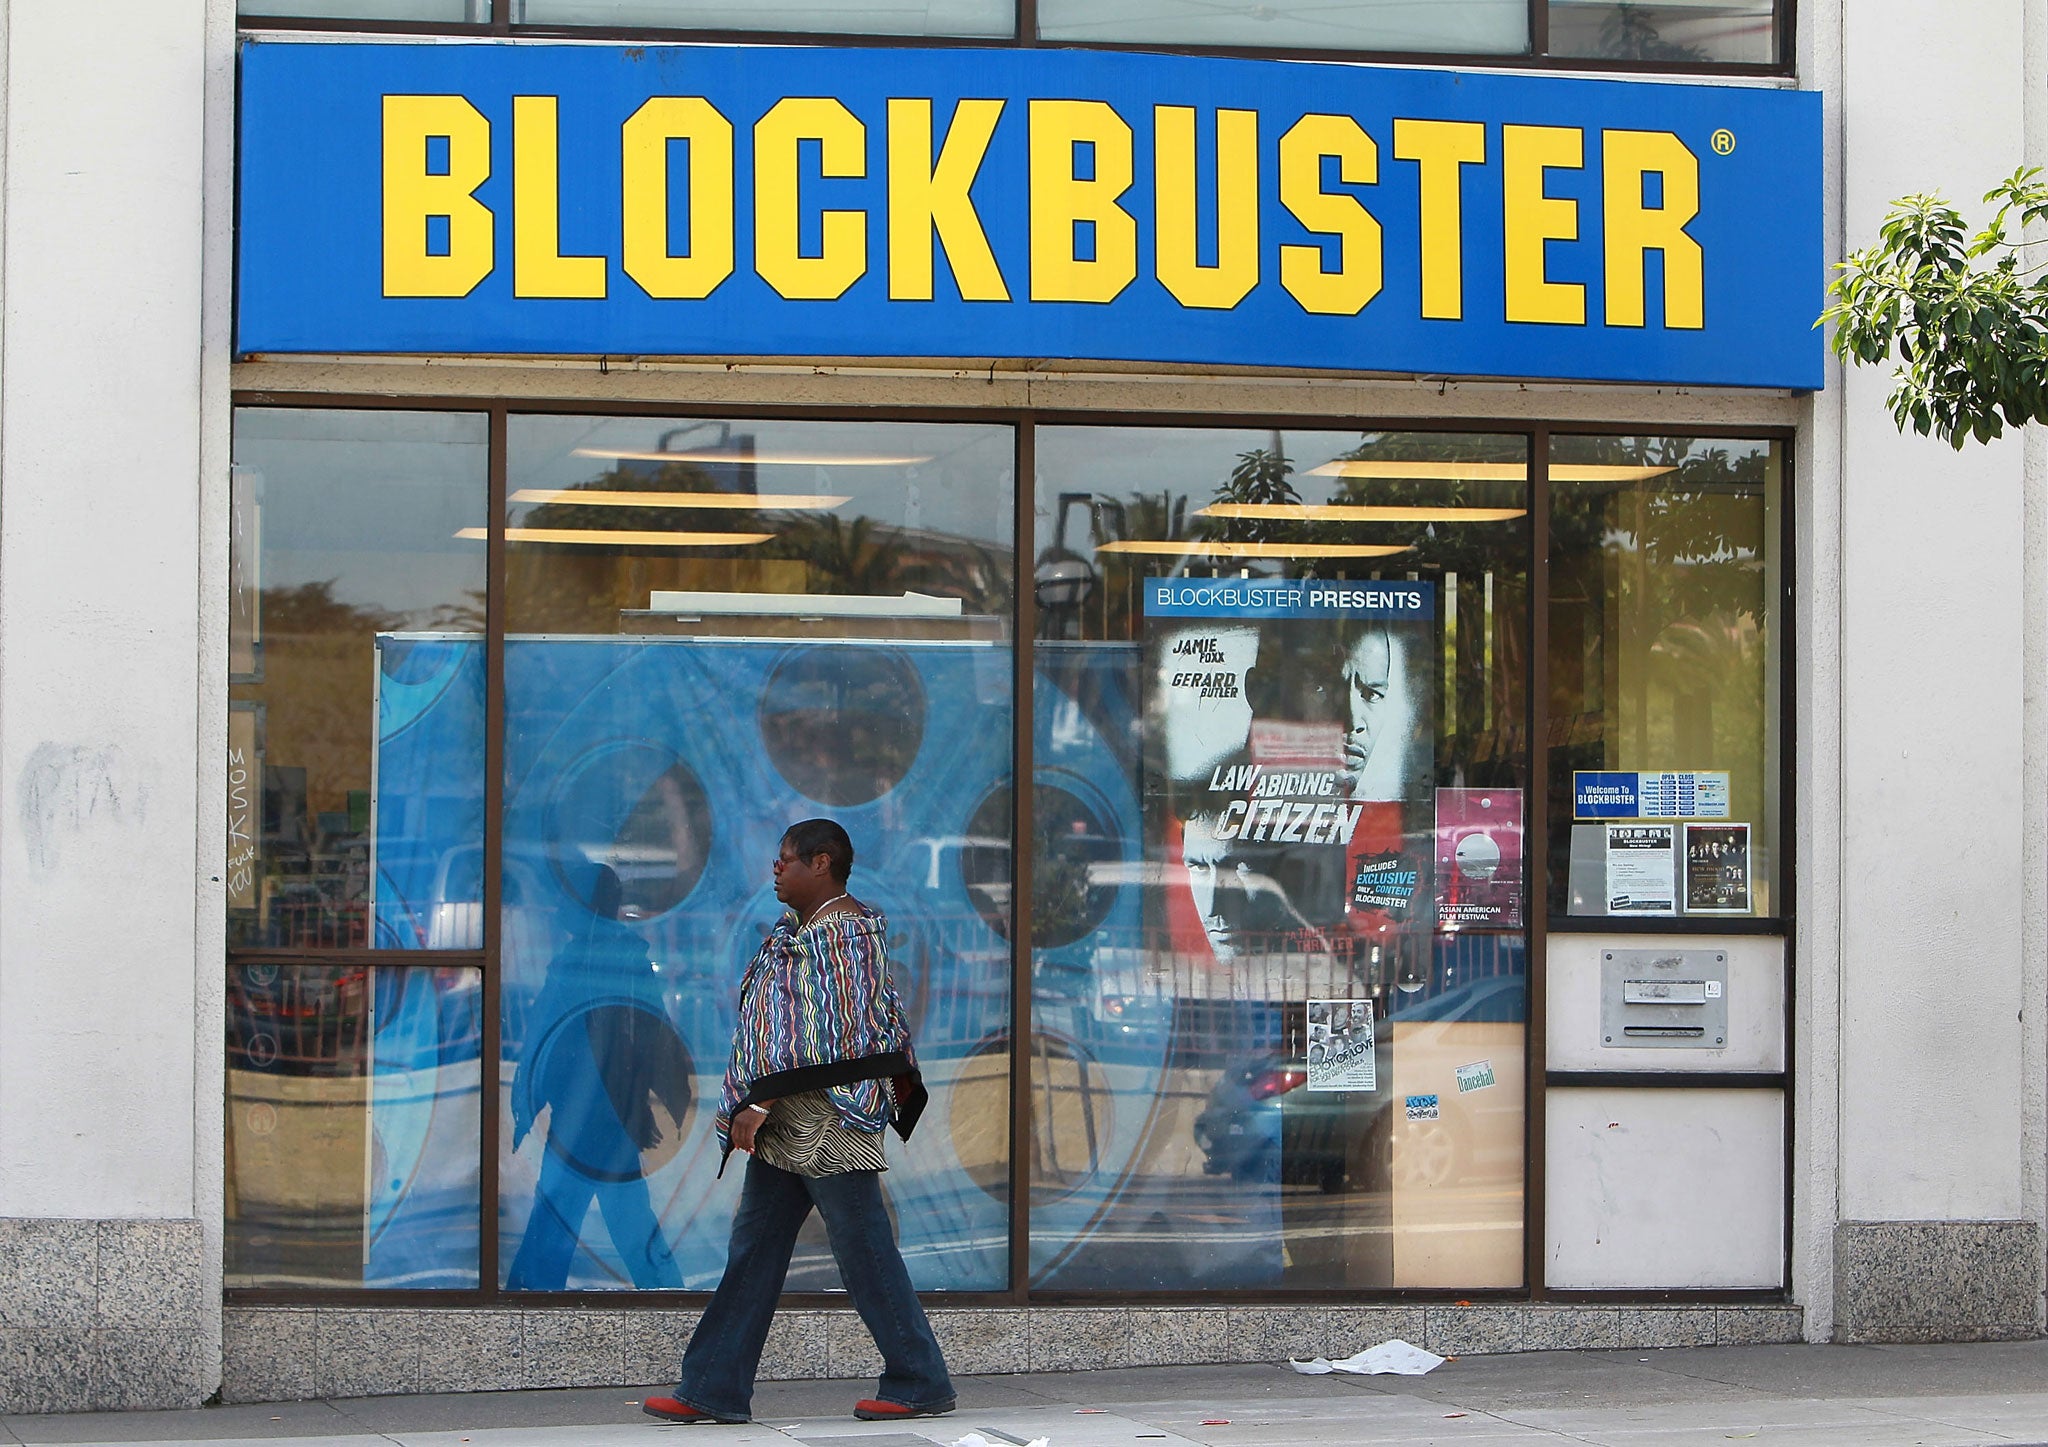 Blockbuster is to shut 72 stores in the UK